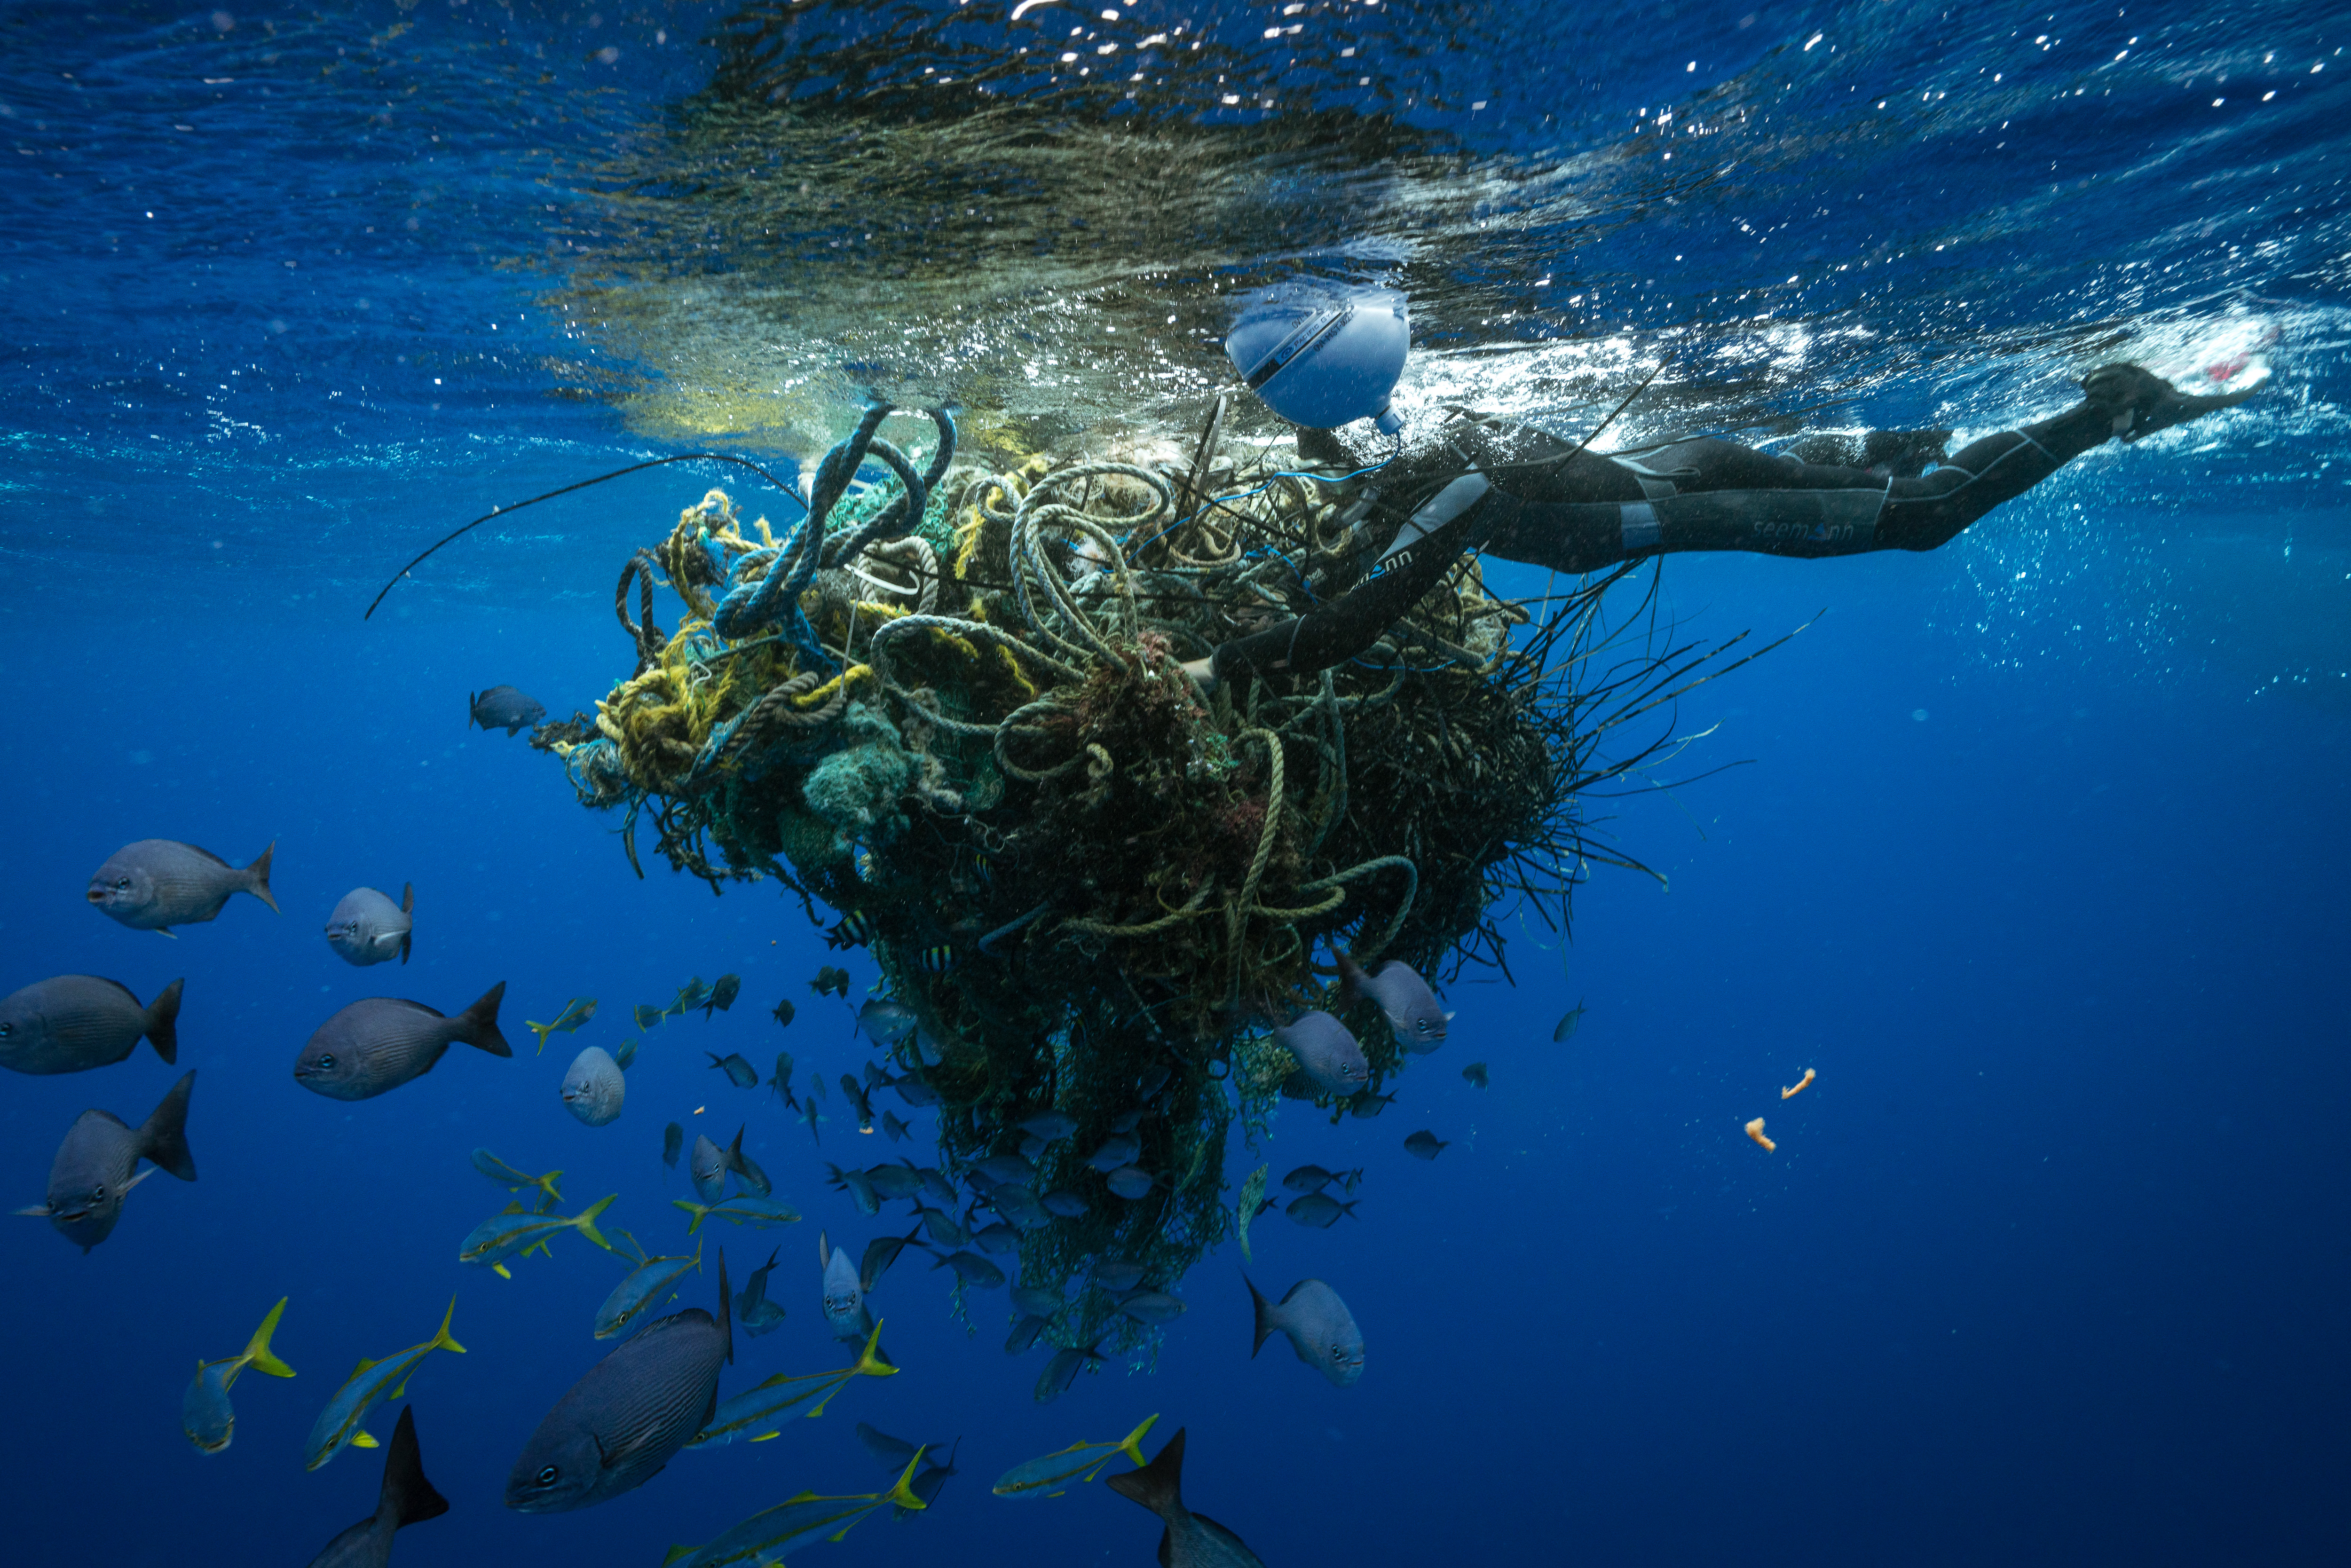 Ghost gear: the abandoned fishing nets haunting our oceans